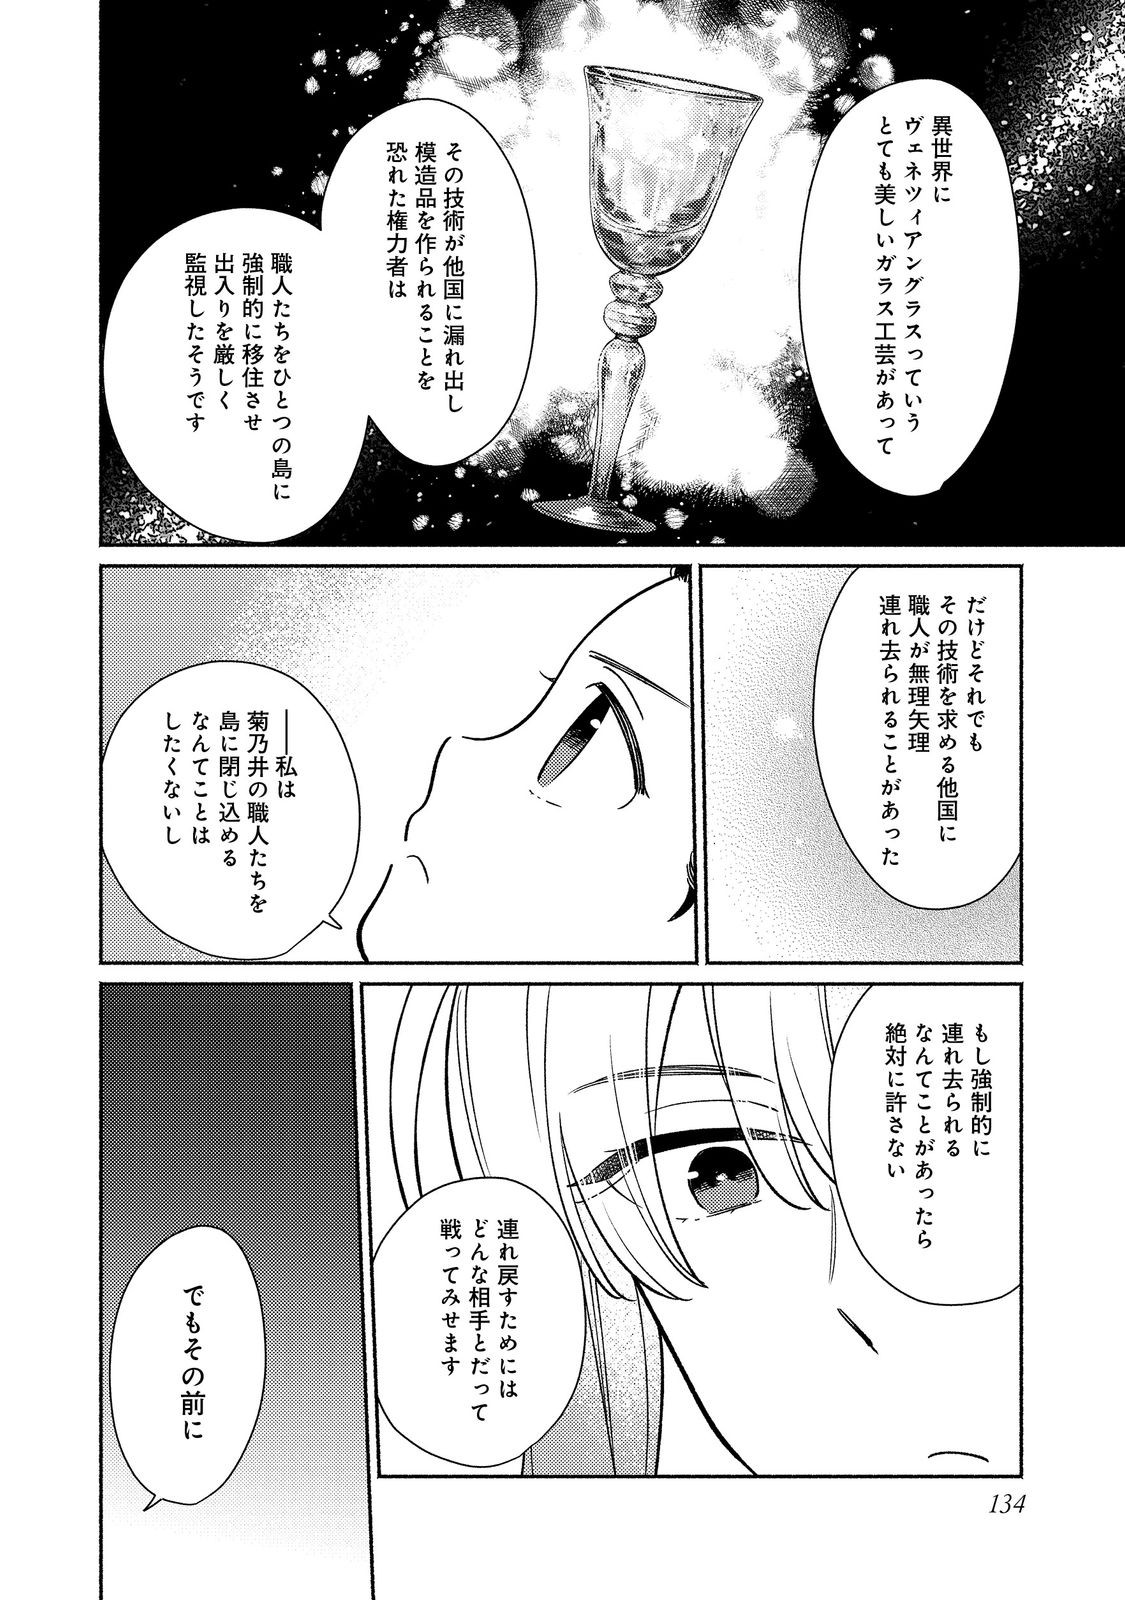 I’m the White Pig Nobleman 第20.1話 - Page 8